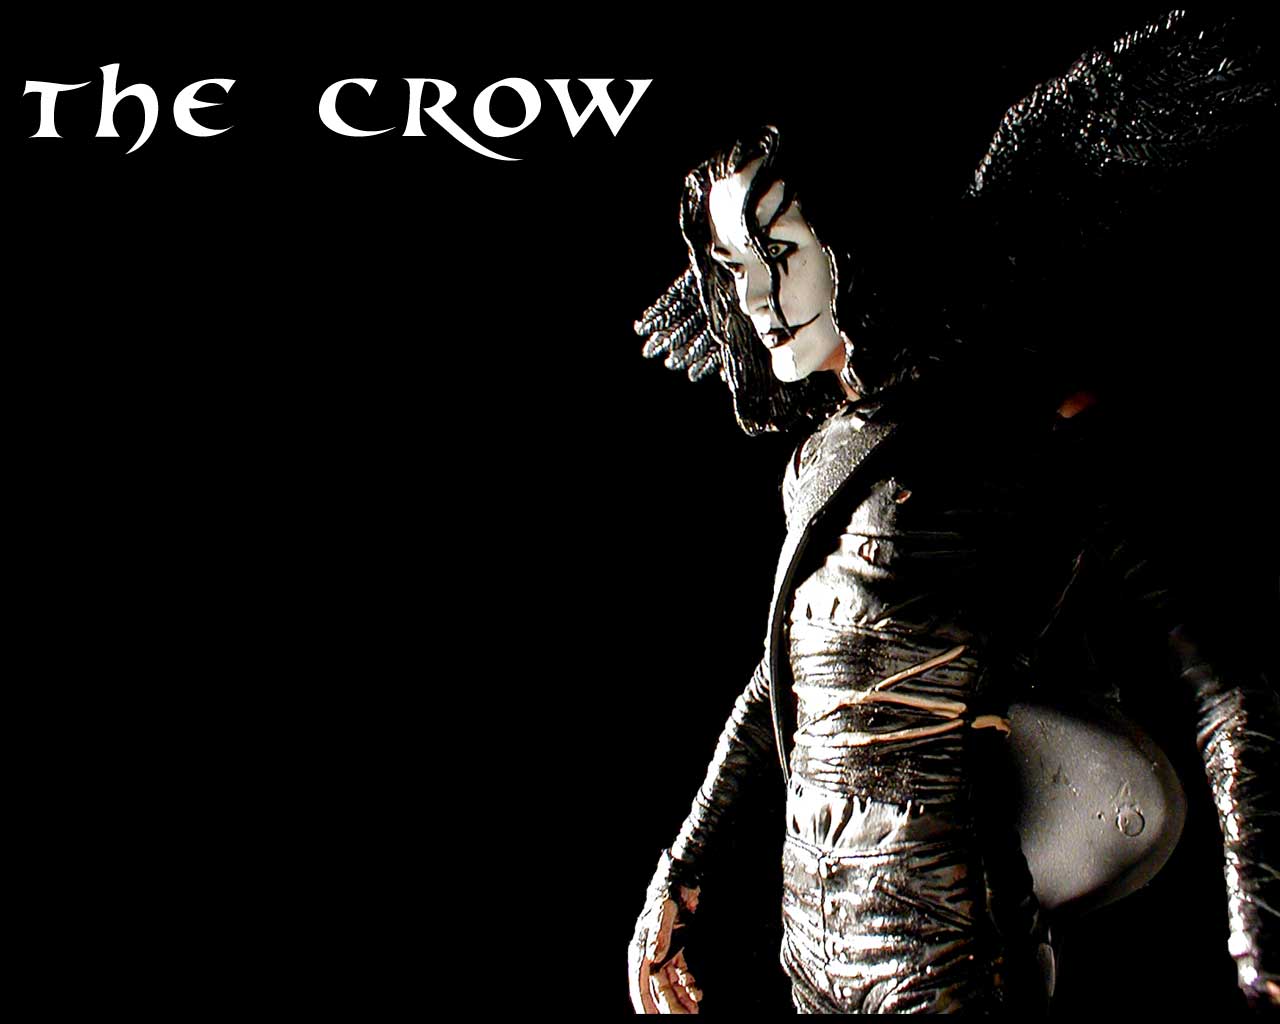 20 The Crow HD Wallpapers and Backgrounds